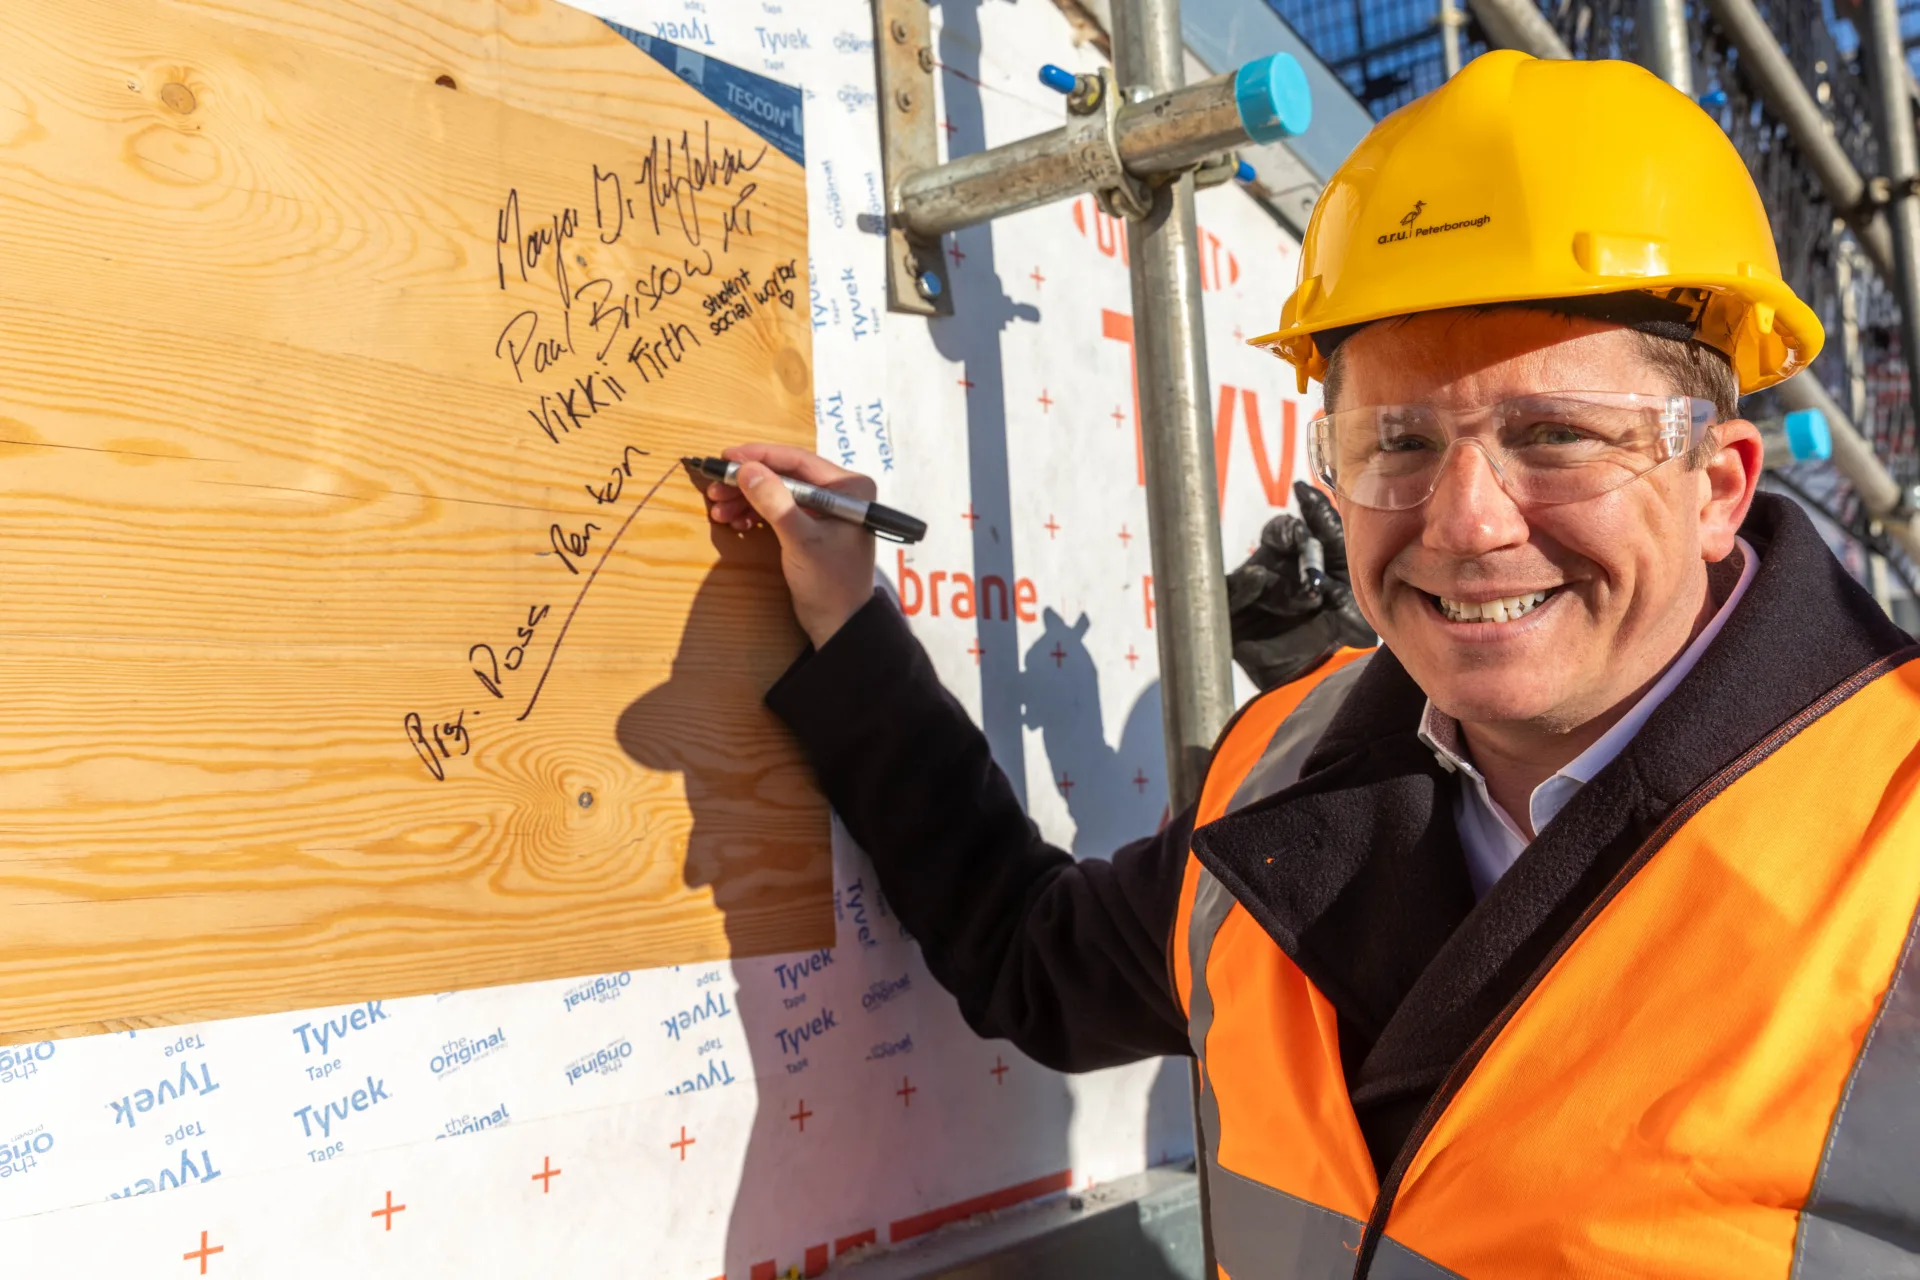 Anglian Ruskin University topping out ceremony for an extension to the Peterborough campus that will incorporate a ‘Living Lab’ public science and technology space. It will open in September. Principal Professor Ross Renton signs one of the roof panels. PHOTO: Terry Harris.